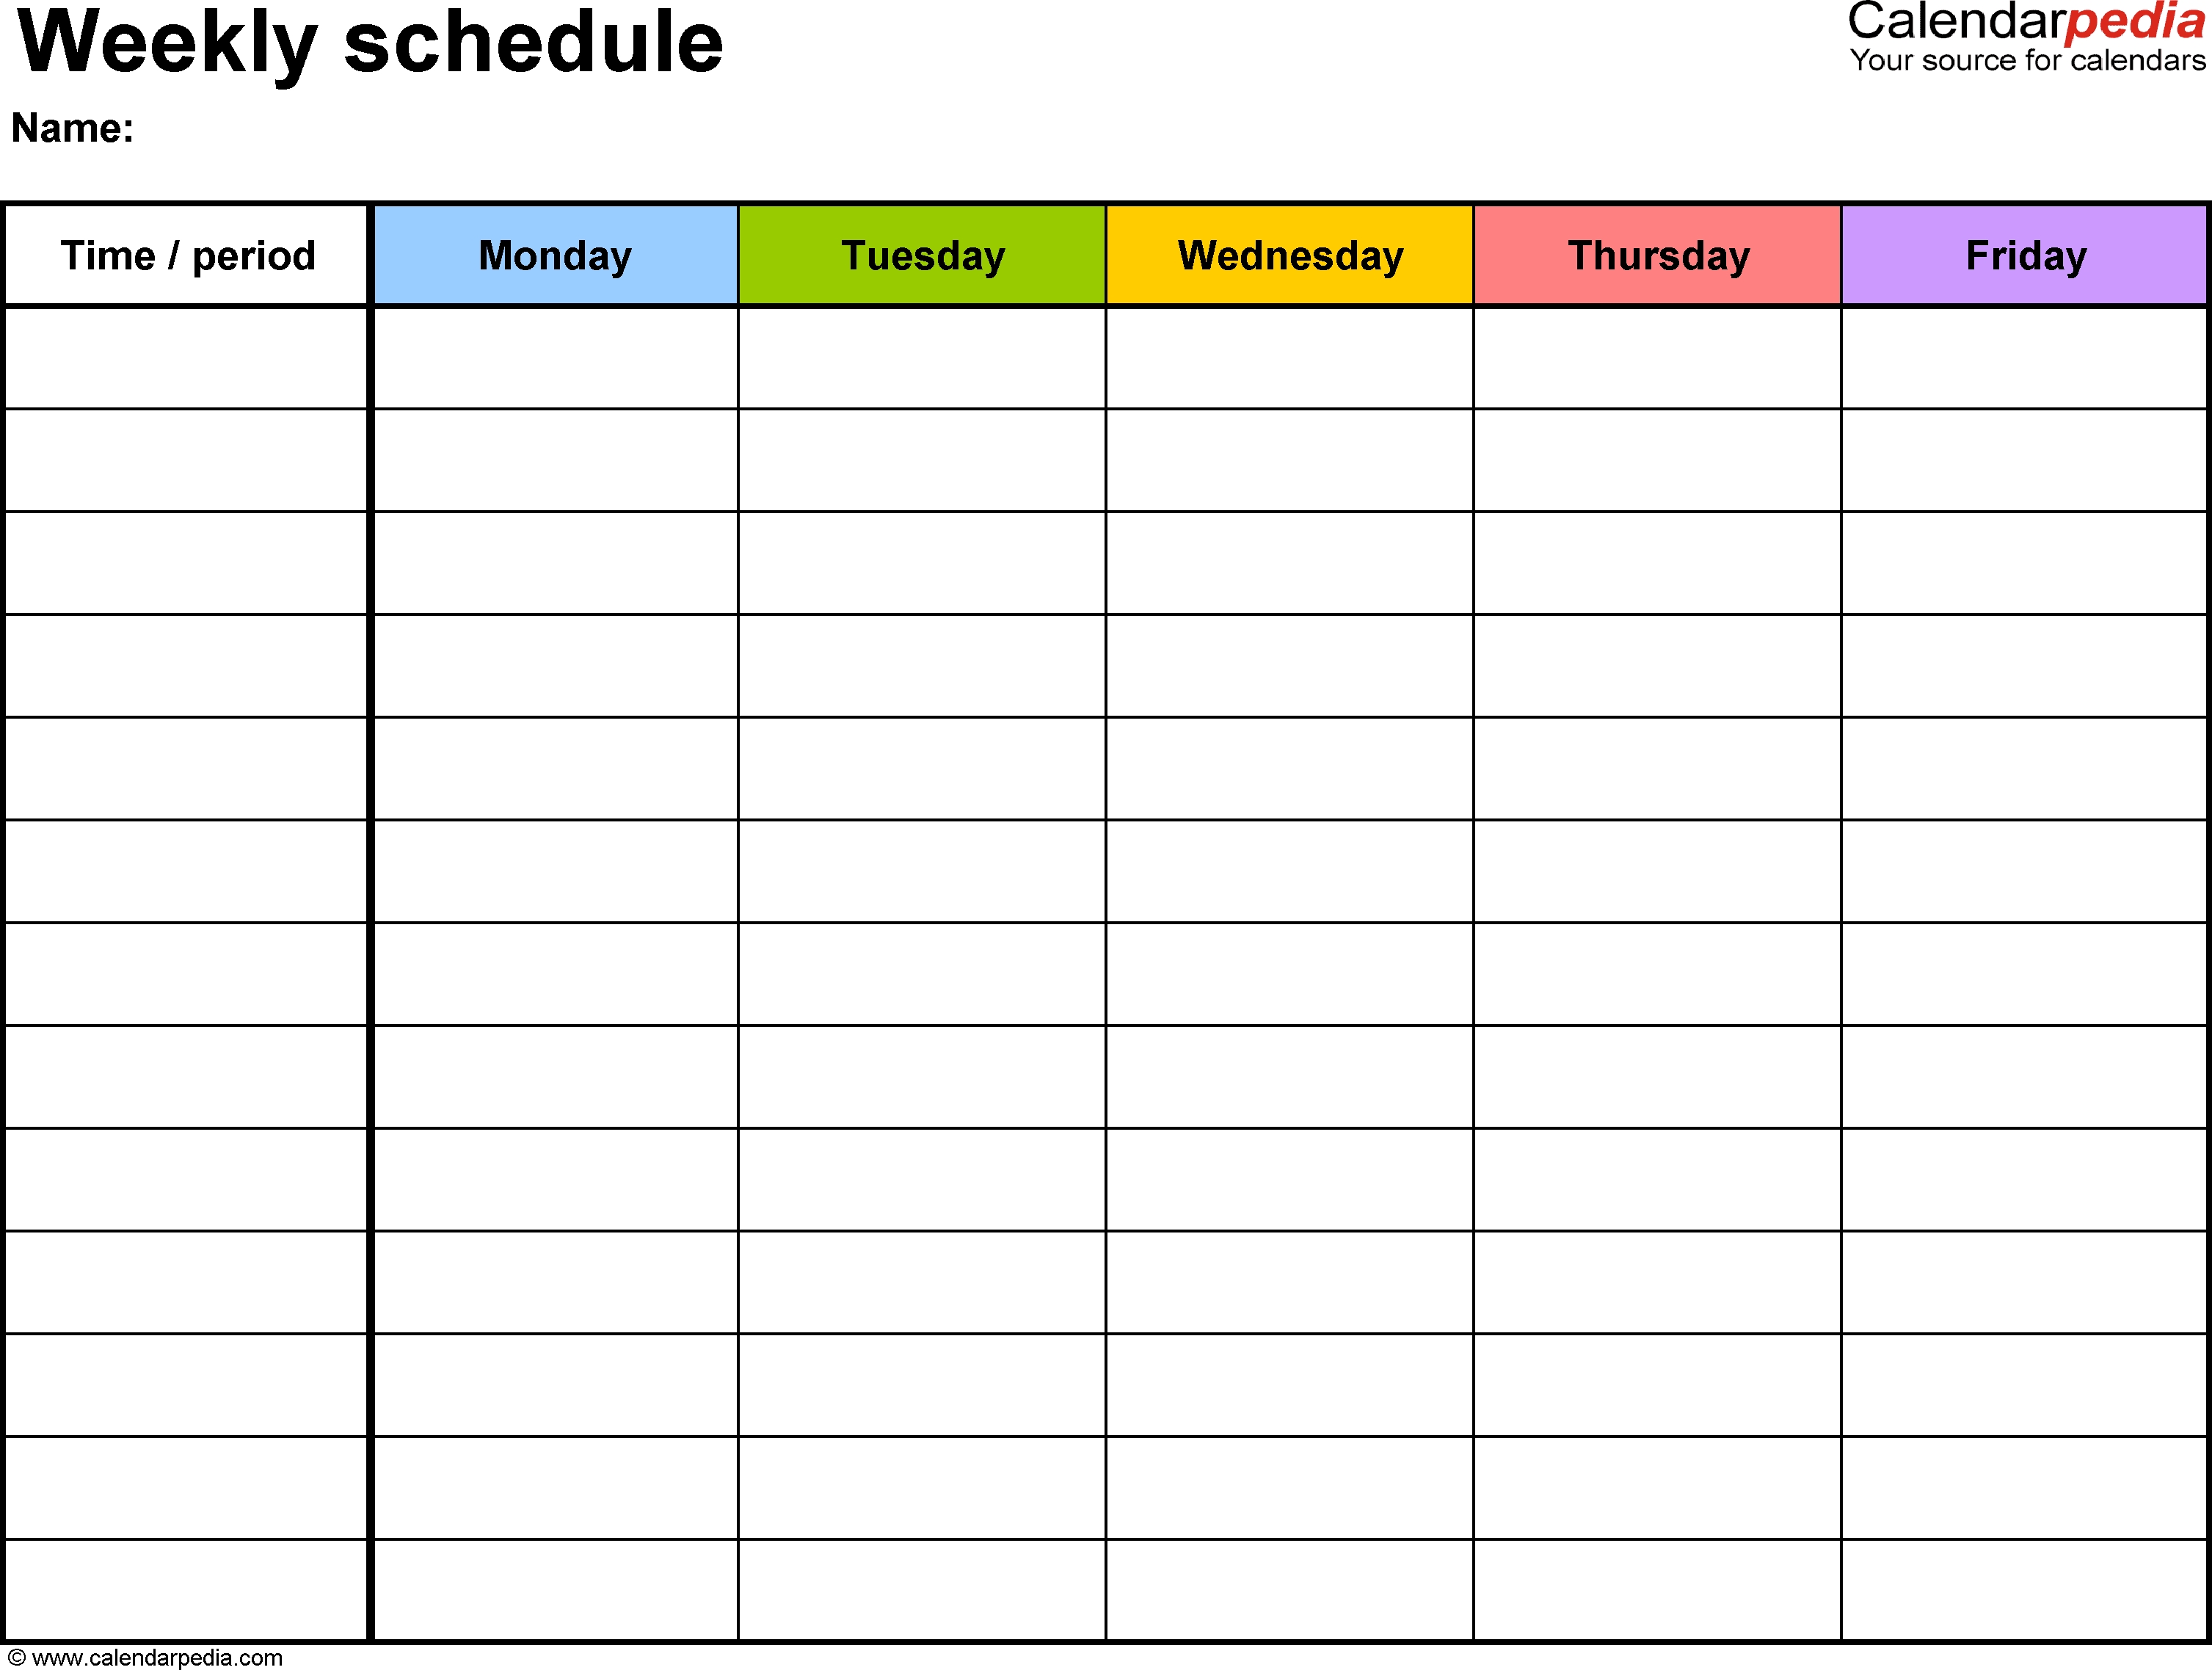 Free Weekly Schedule Templates For Word - 18 Templates Calendar By Week Template